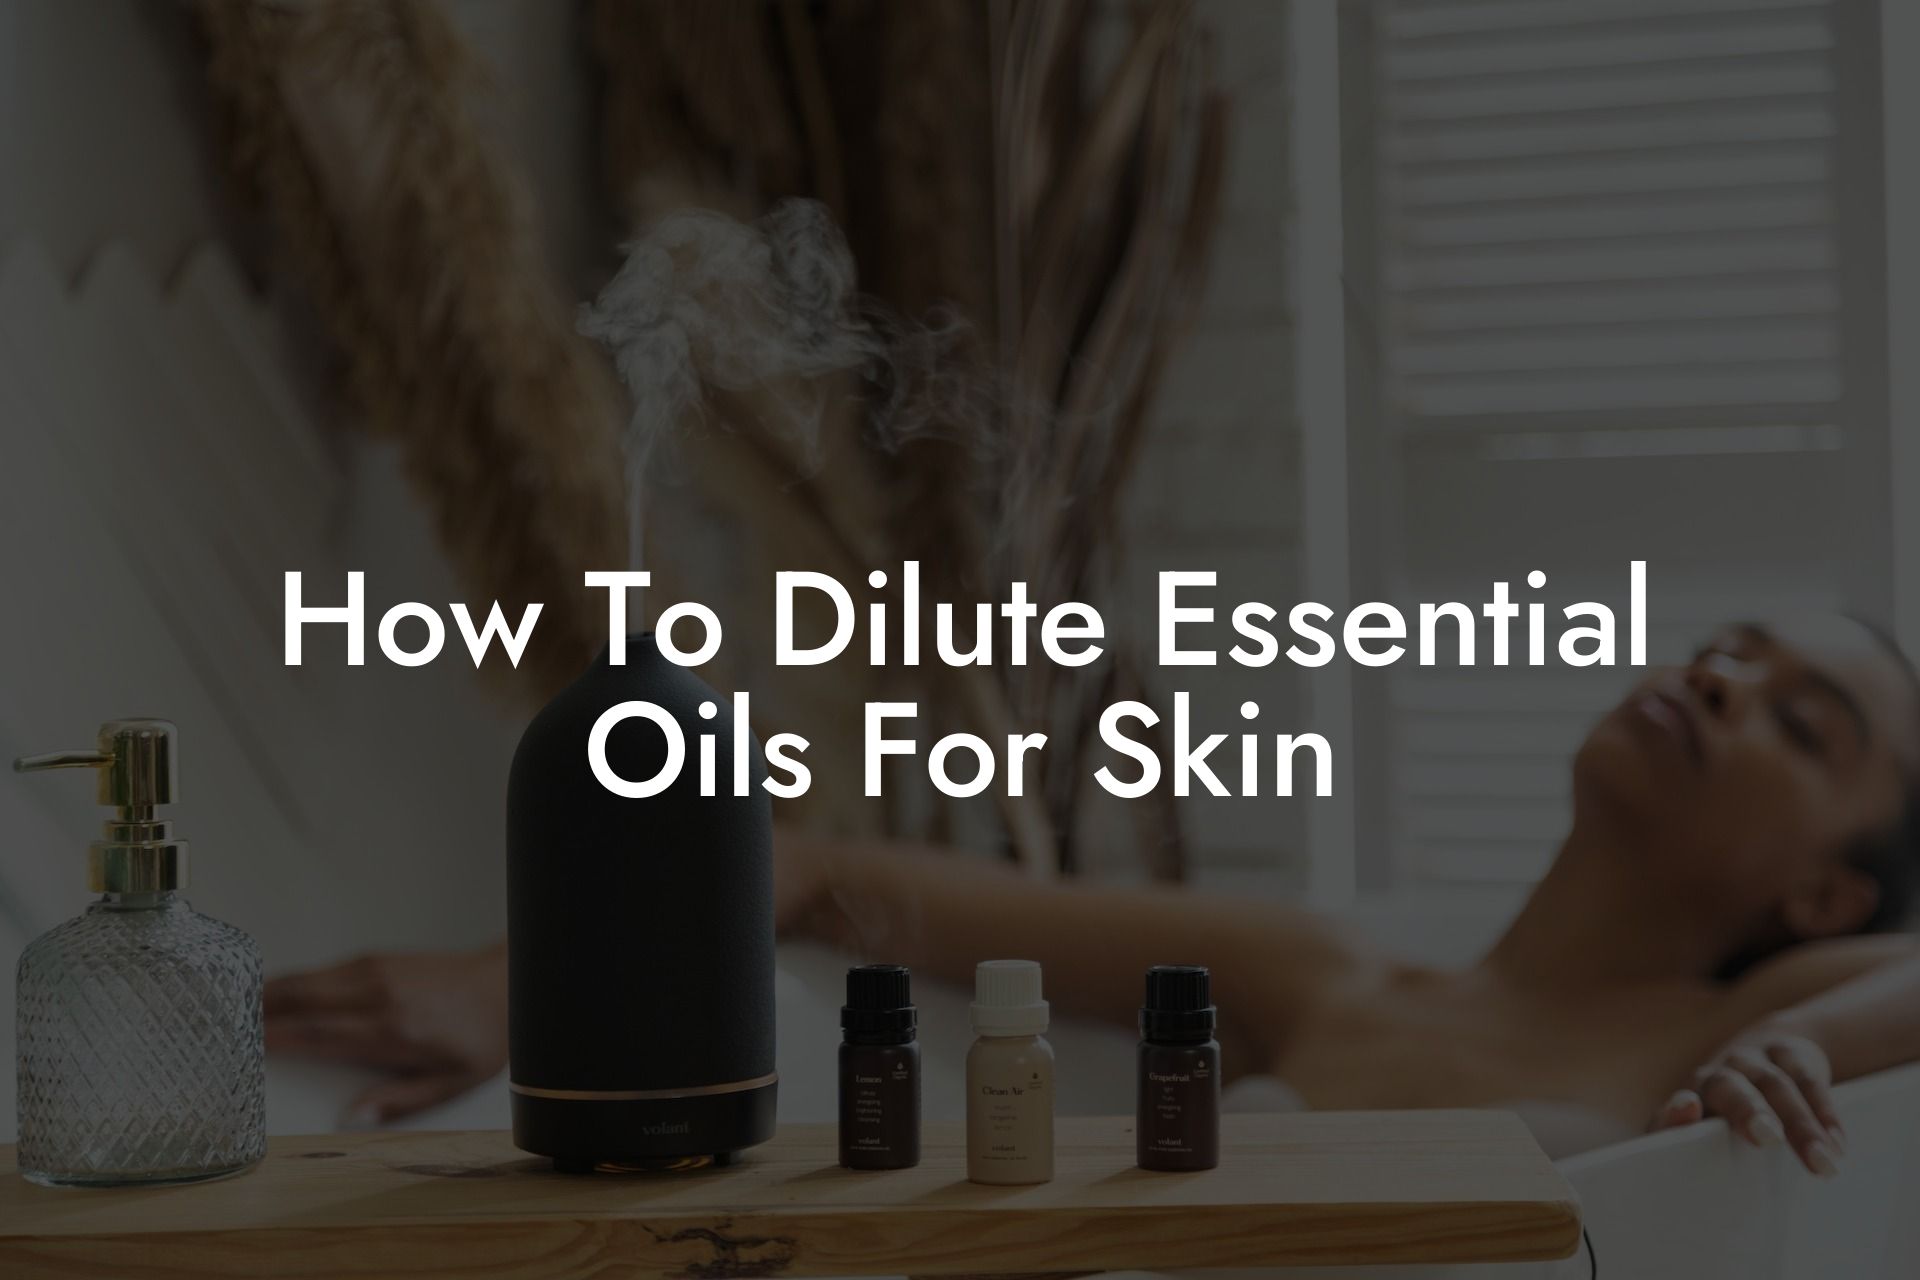 How To Dilute Essential Oils For Skin